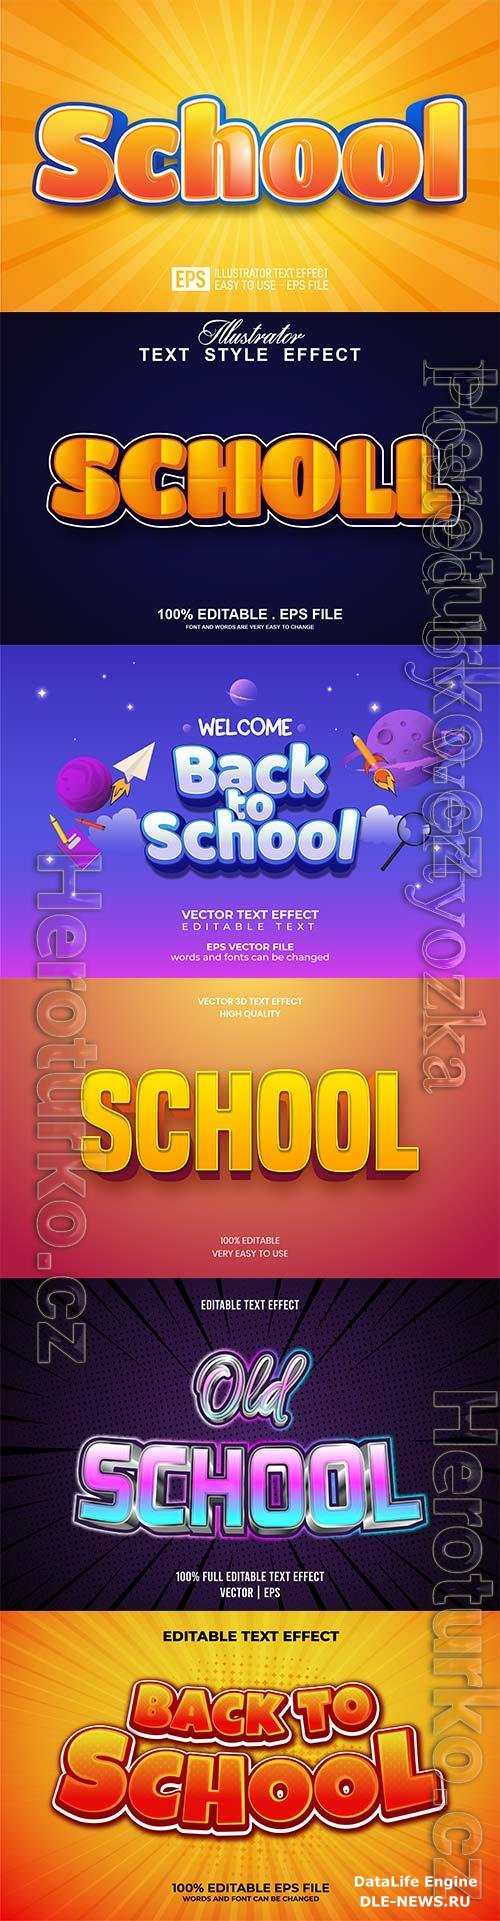 Back to school editable text effect vol 18